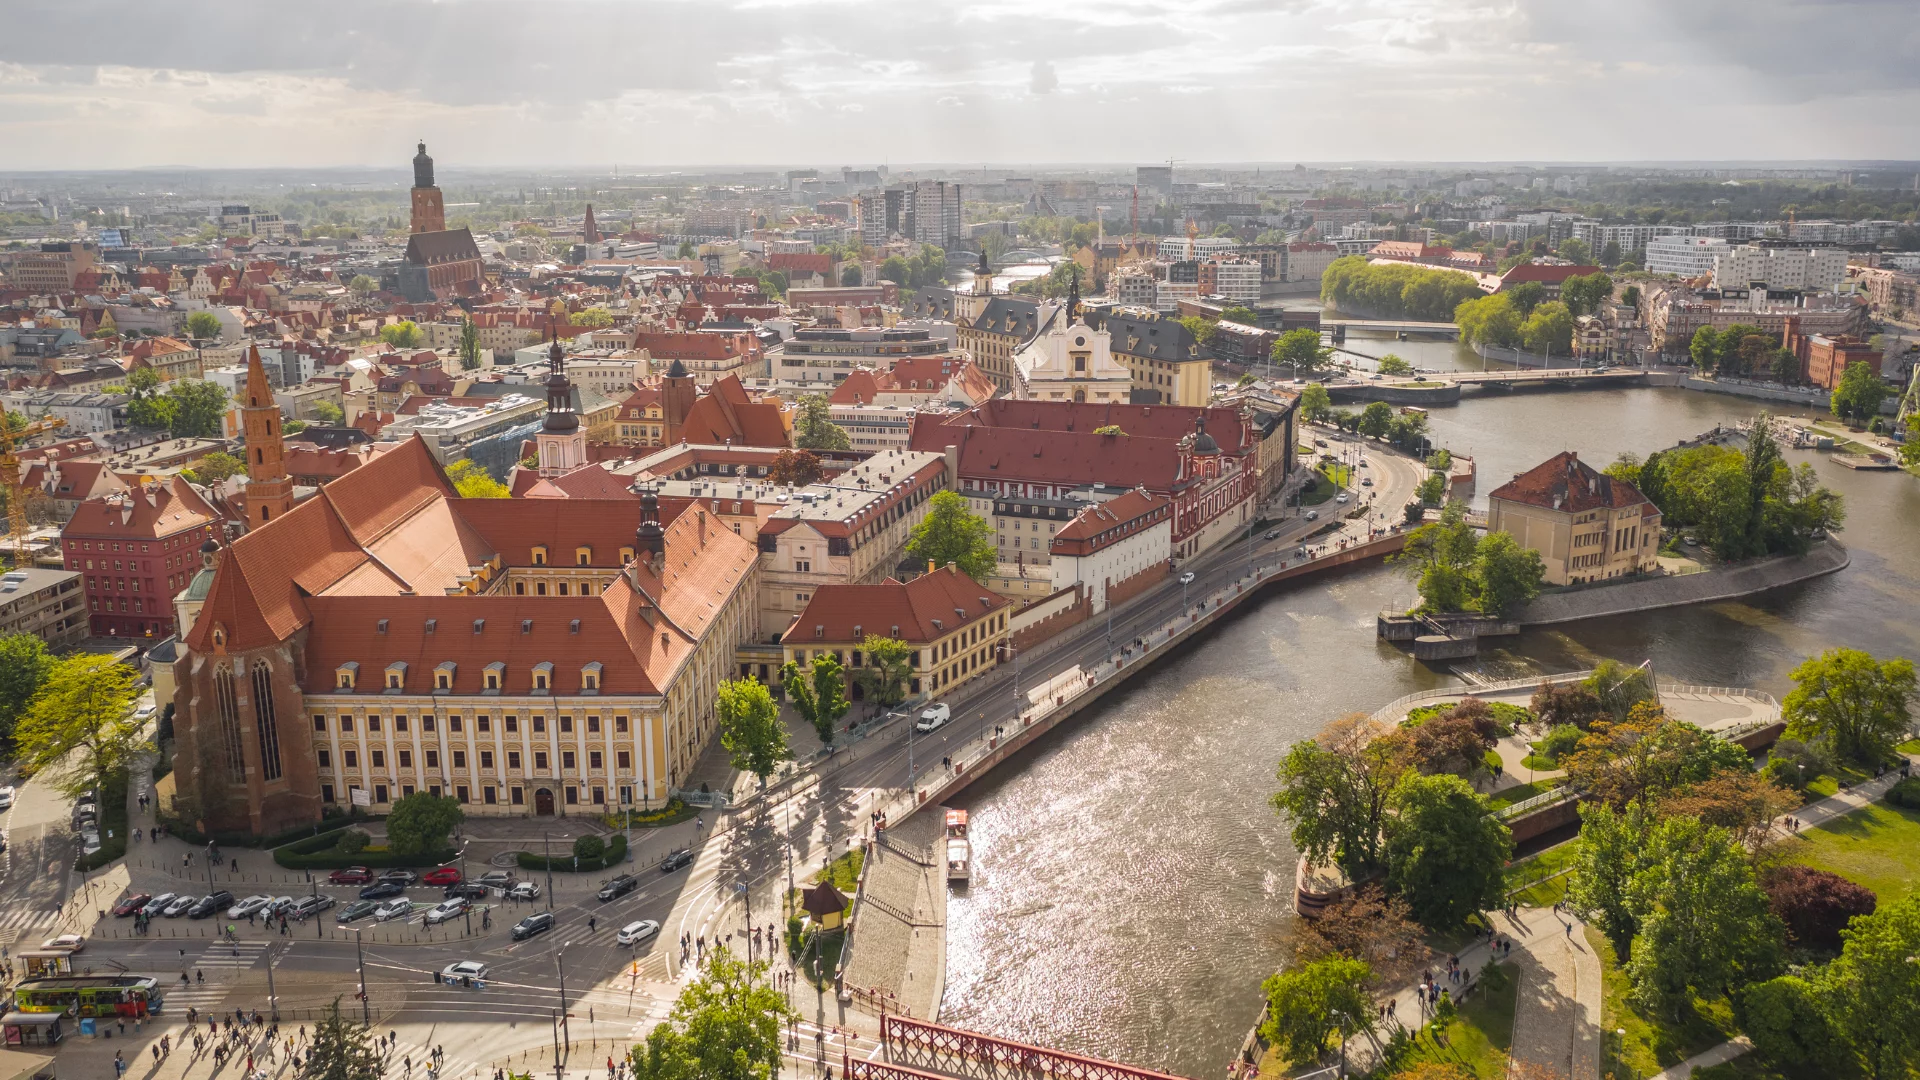 panoramic view of the city of Wroclaw